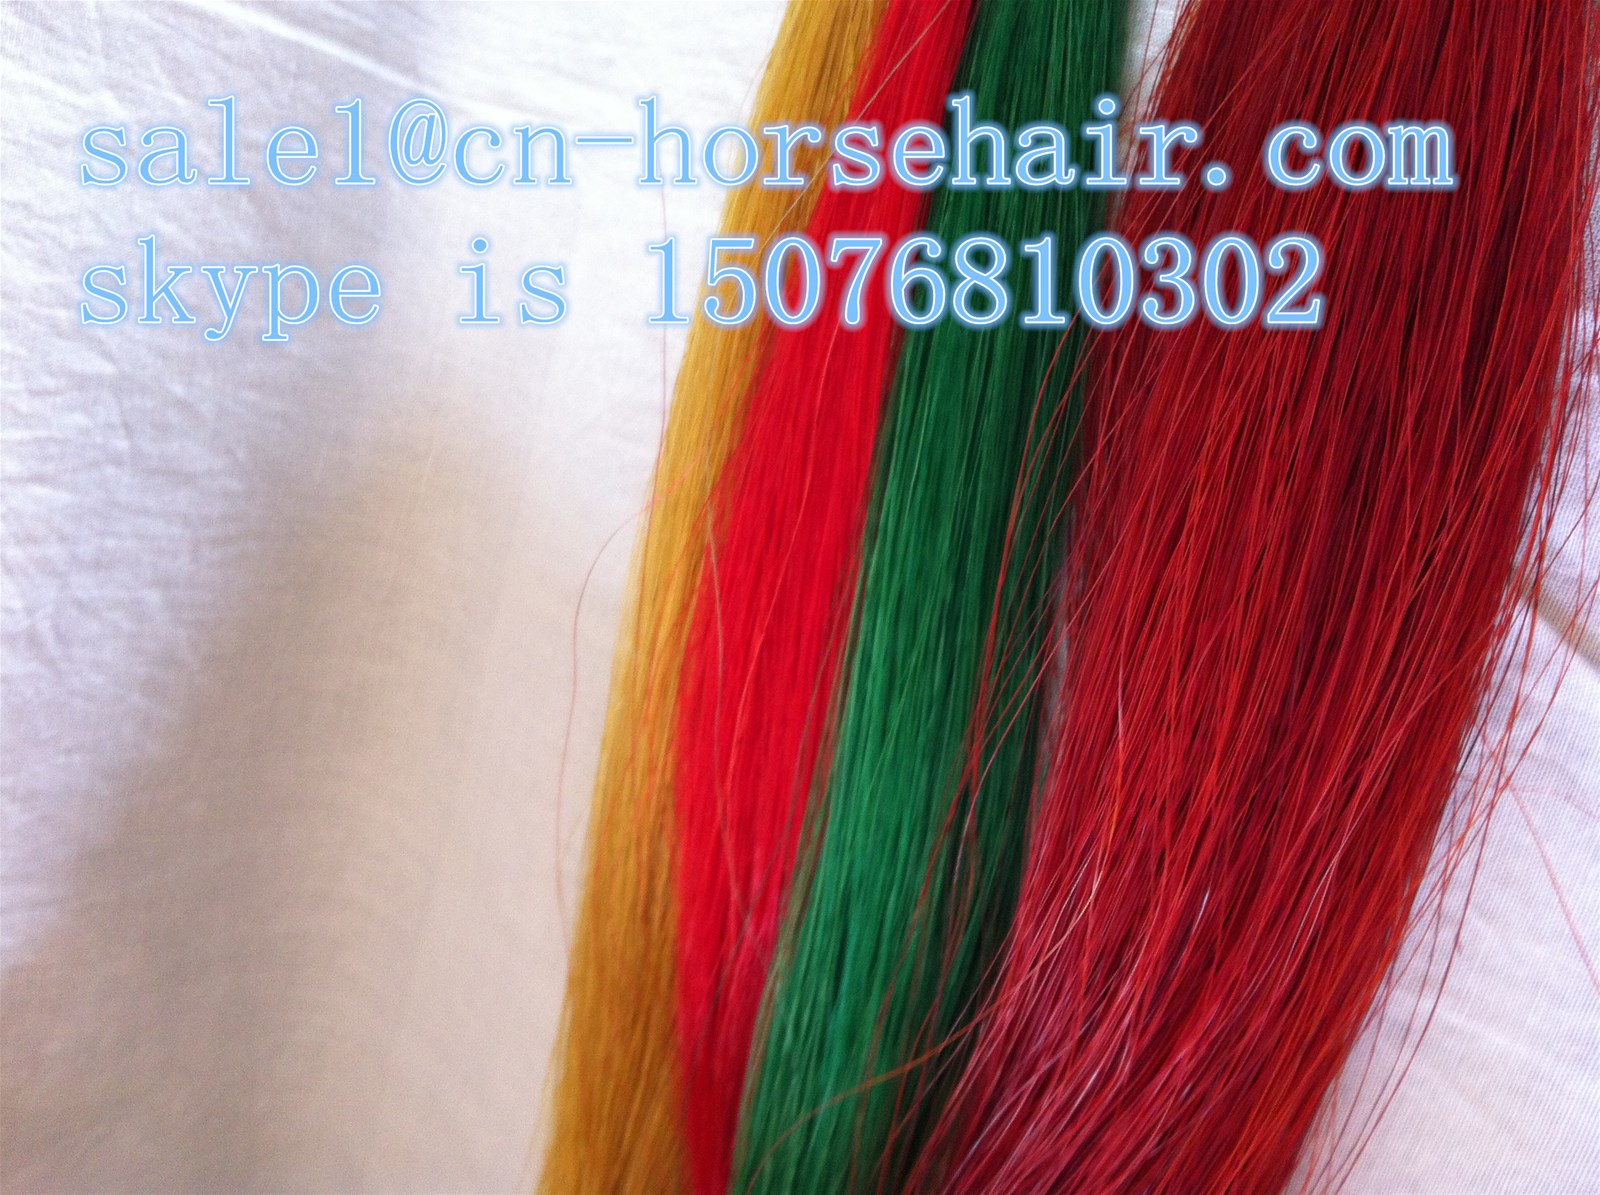 dyed horse hair and dyeing horsetail